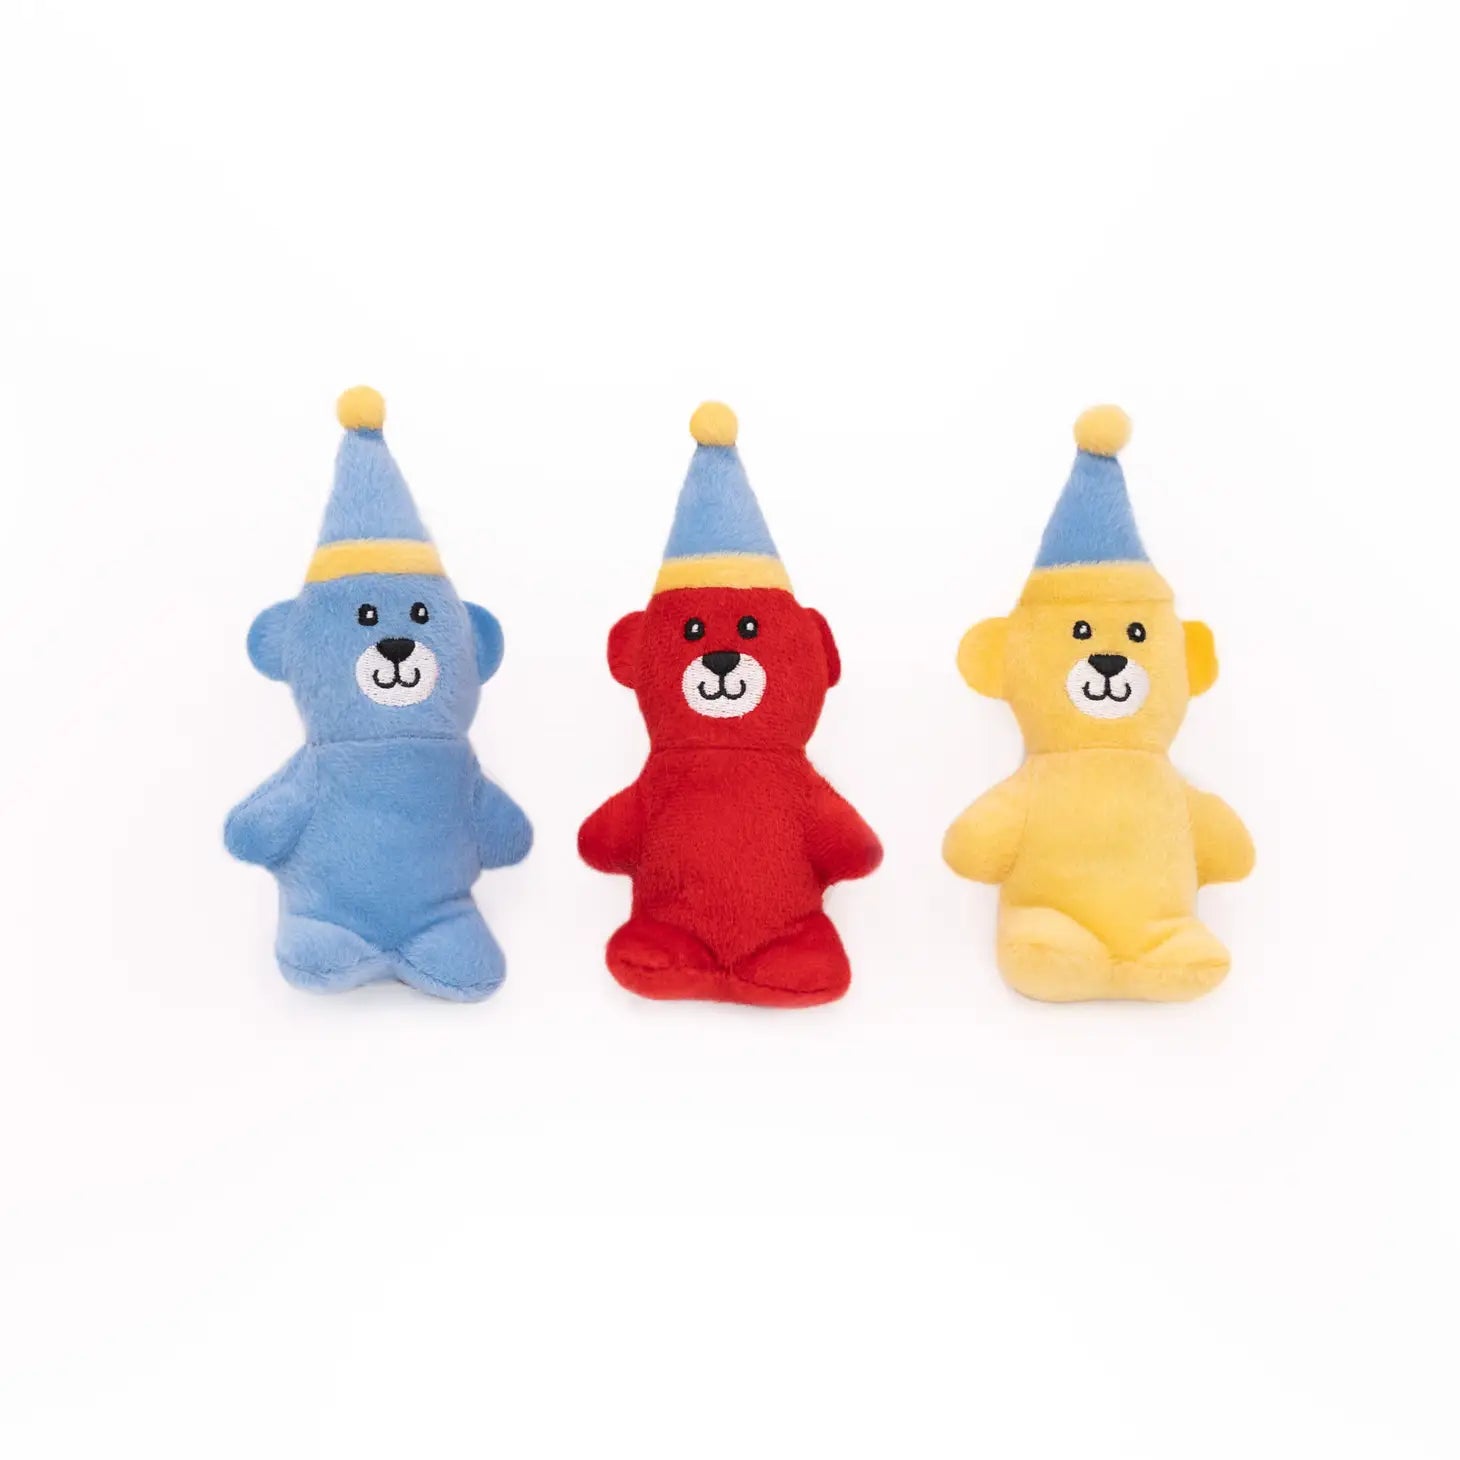 Isolated picture of three small plush bears one is blue, one is red and one is yellow. They are all wearing blue winter hats